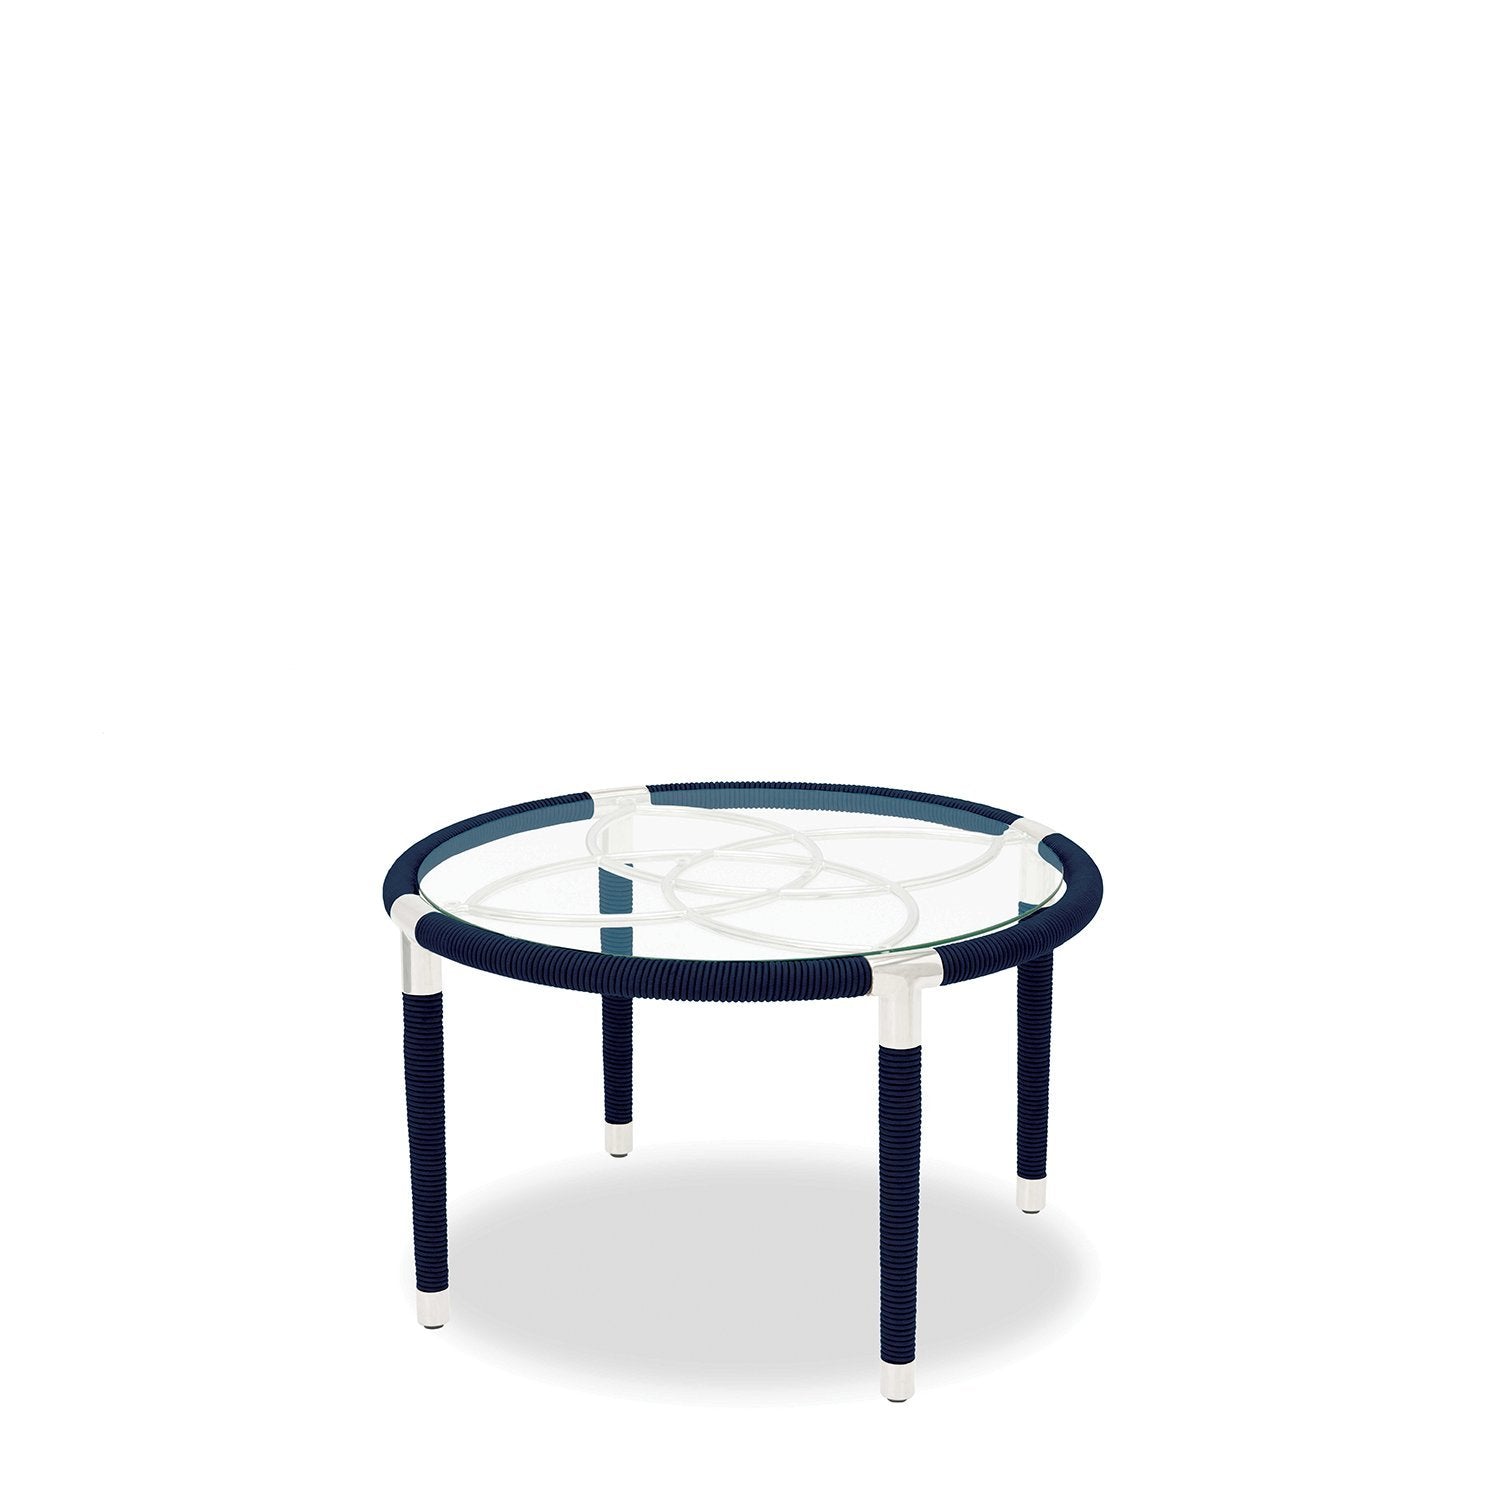 Davos Round Coffee Table